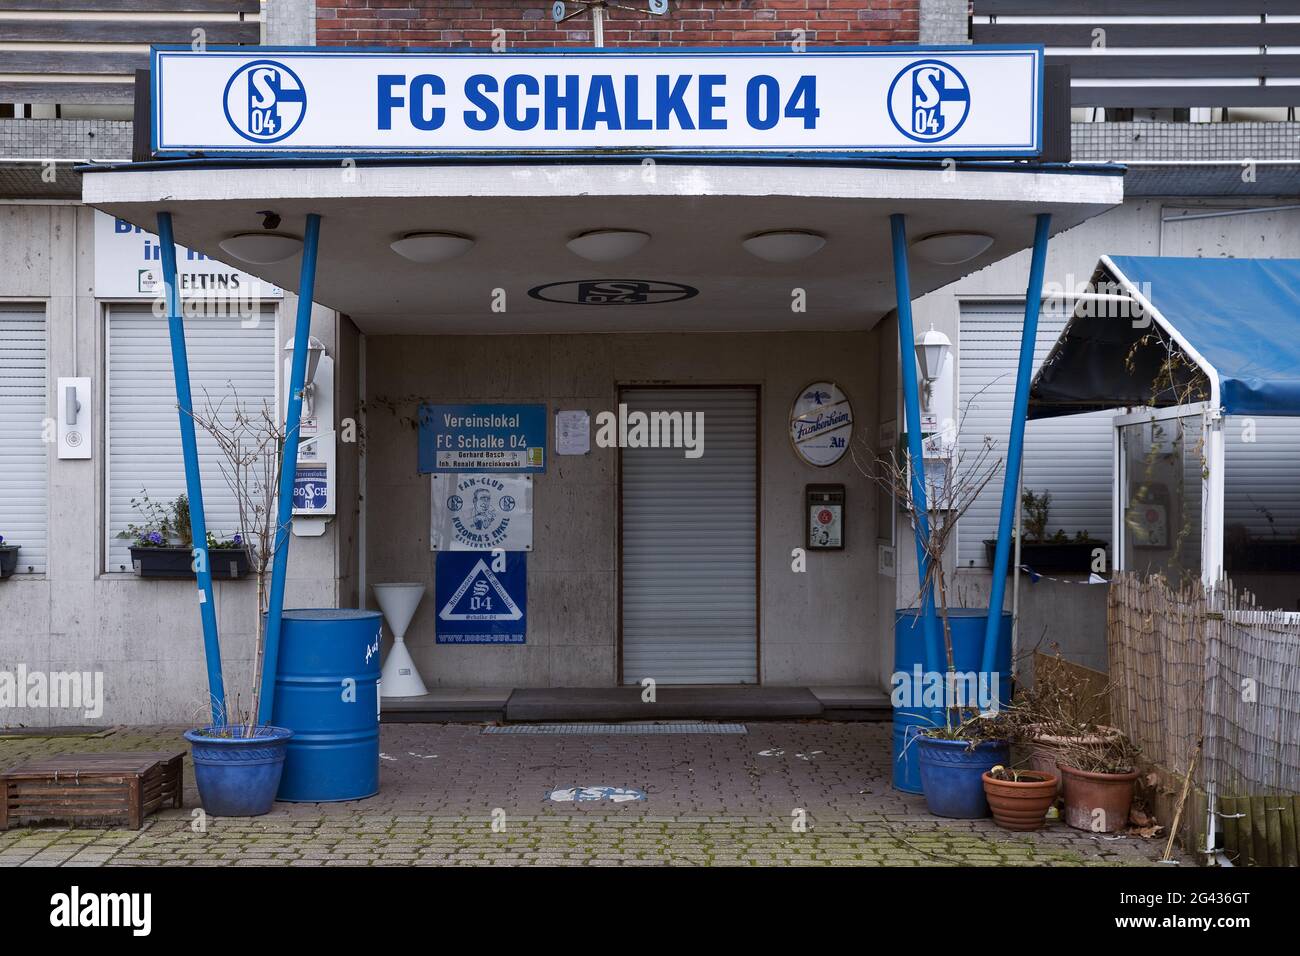 Tristess at the closed club premises of FC Schlake 04, Schalke, district of Gelsenkirchen, Germany Stock Photo